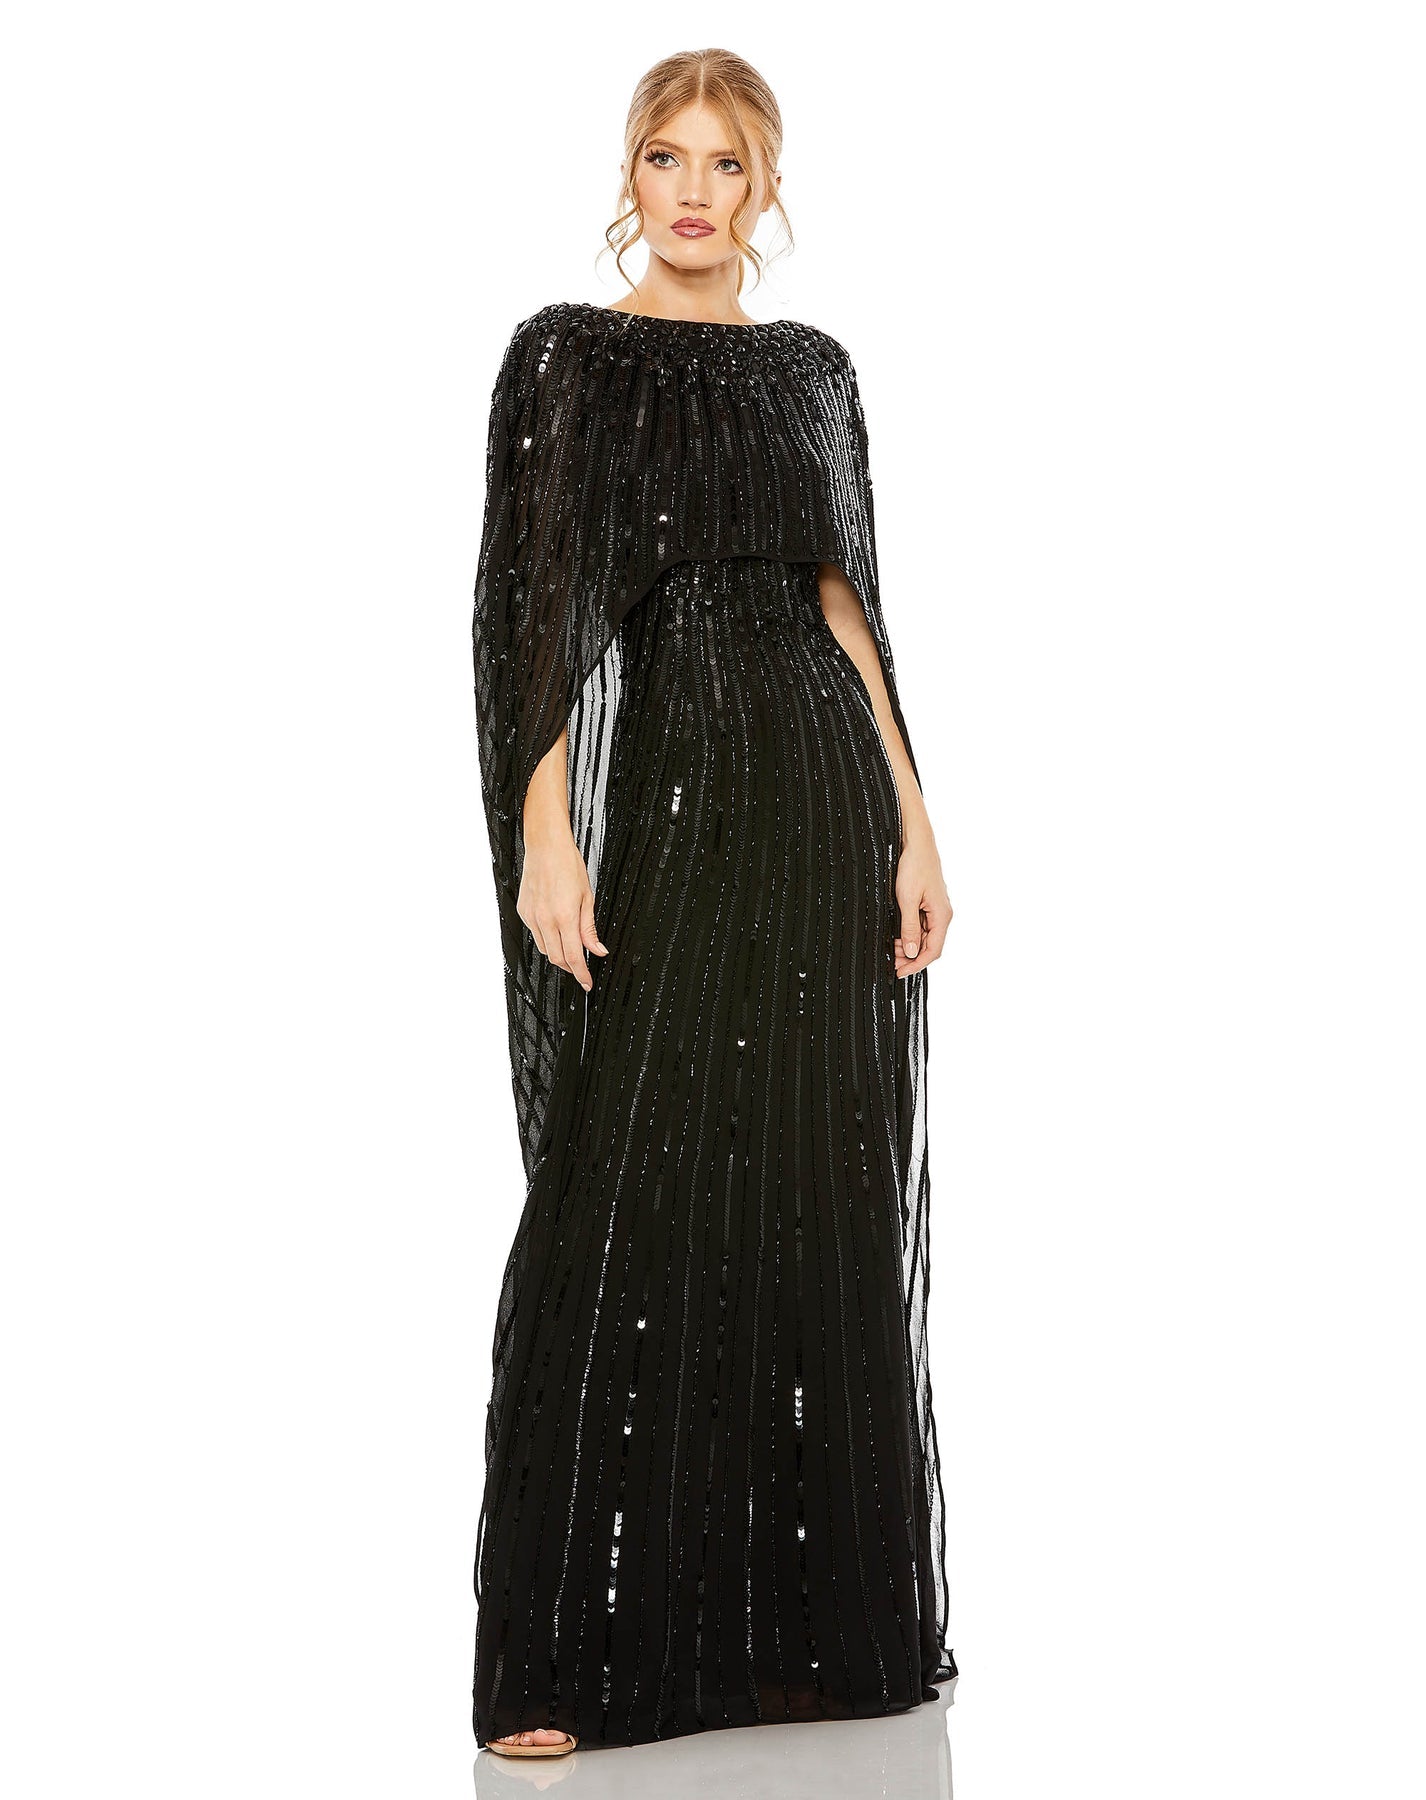 Mac Duggal Embellished mesh overlay fabric; 100% polyester lining Fully lined through bodice and skirt; sheer unlined cape overlay Boat neckline Cape sleeves Asymmetrical cape overlay Sweeping train Concealed back zipper Approx. 62.5" from top of shoulder